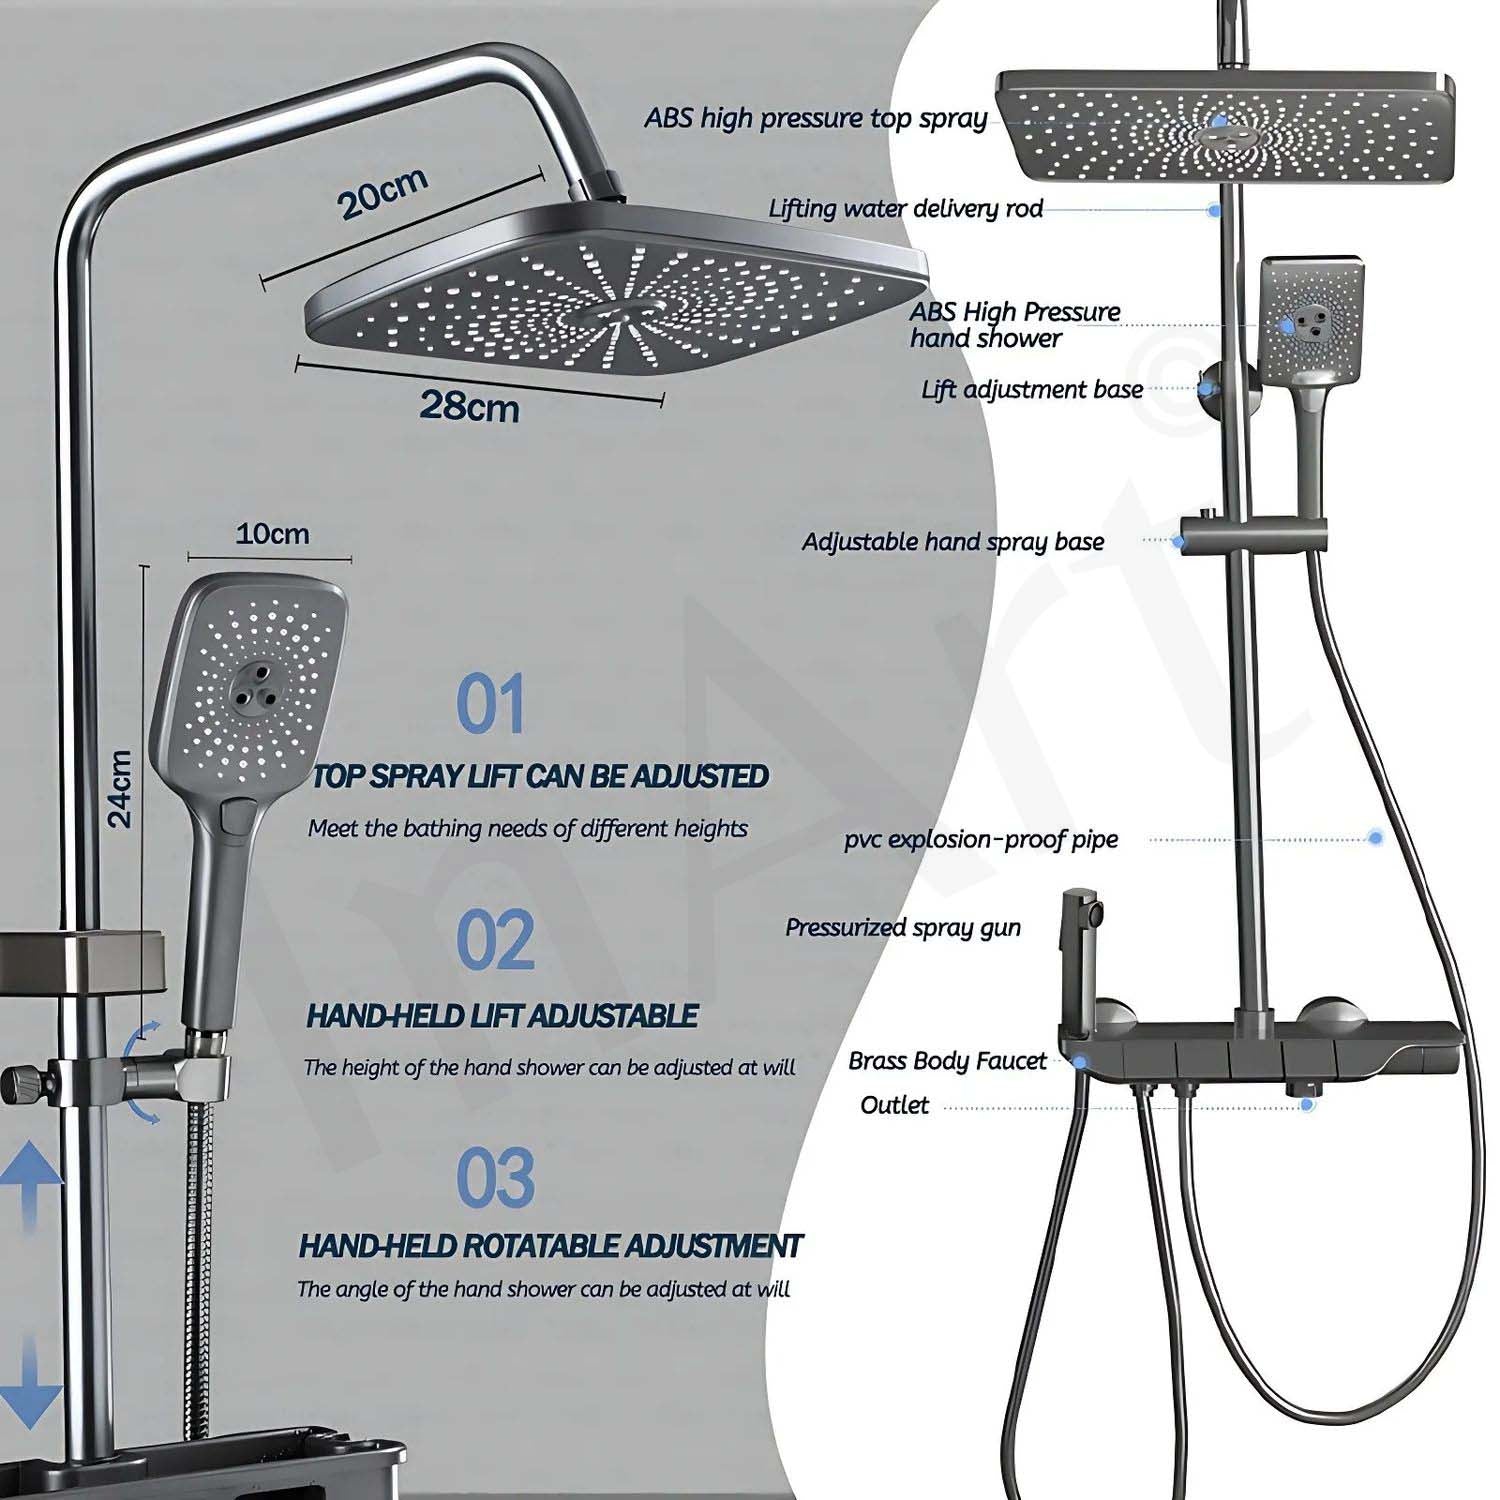 InArt Gun Grey Stainless Steel Shower Panel Set with Single Lever Mixer - Includes Rainfall & Waterfall Overhead, Handheld Shower, Health Faucet & Accessories - InArt-Studio